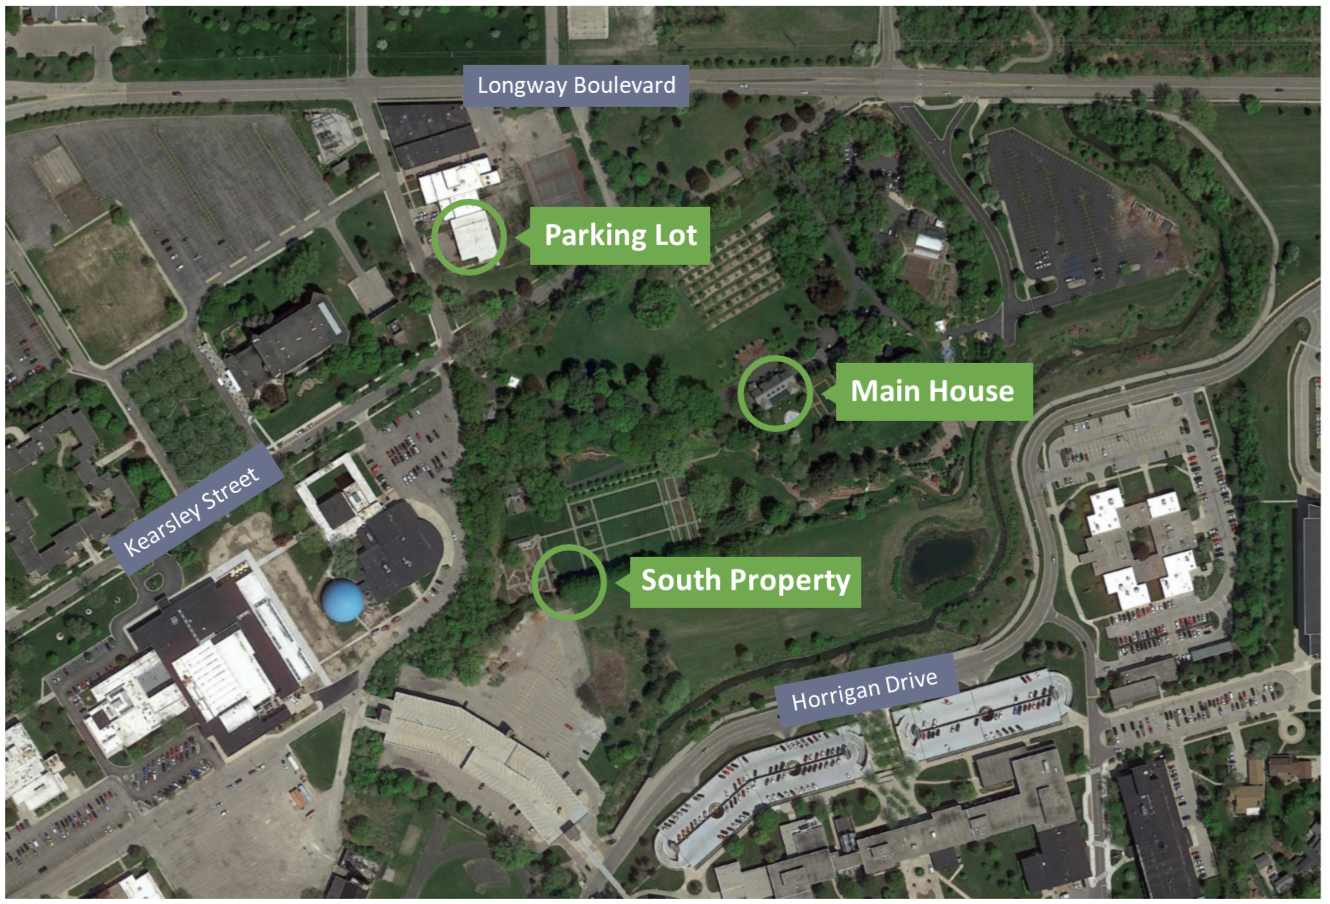 Overhead image of the Applewood property showing where master plan projects are occurring